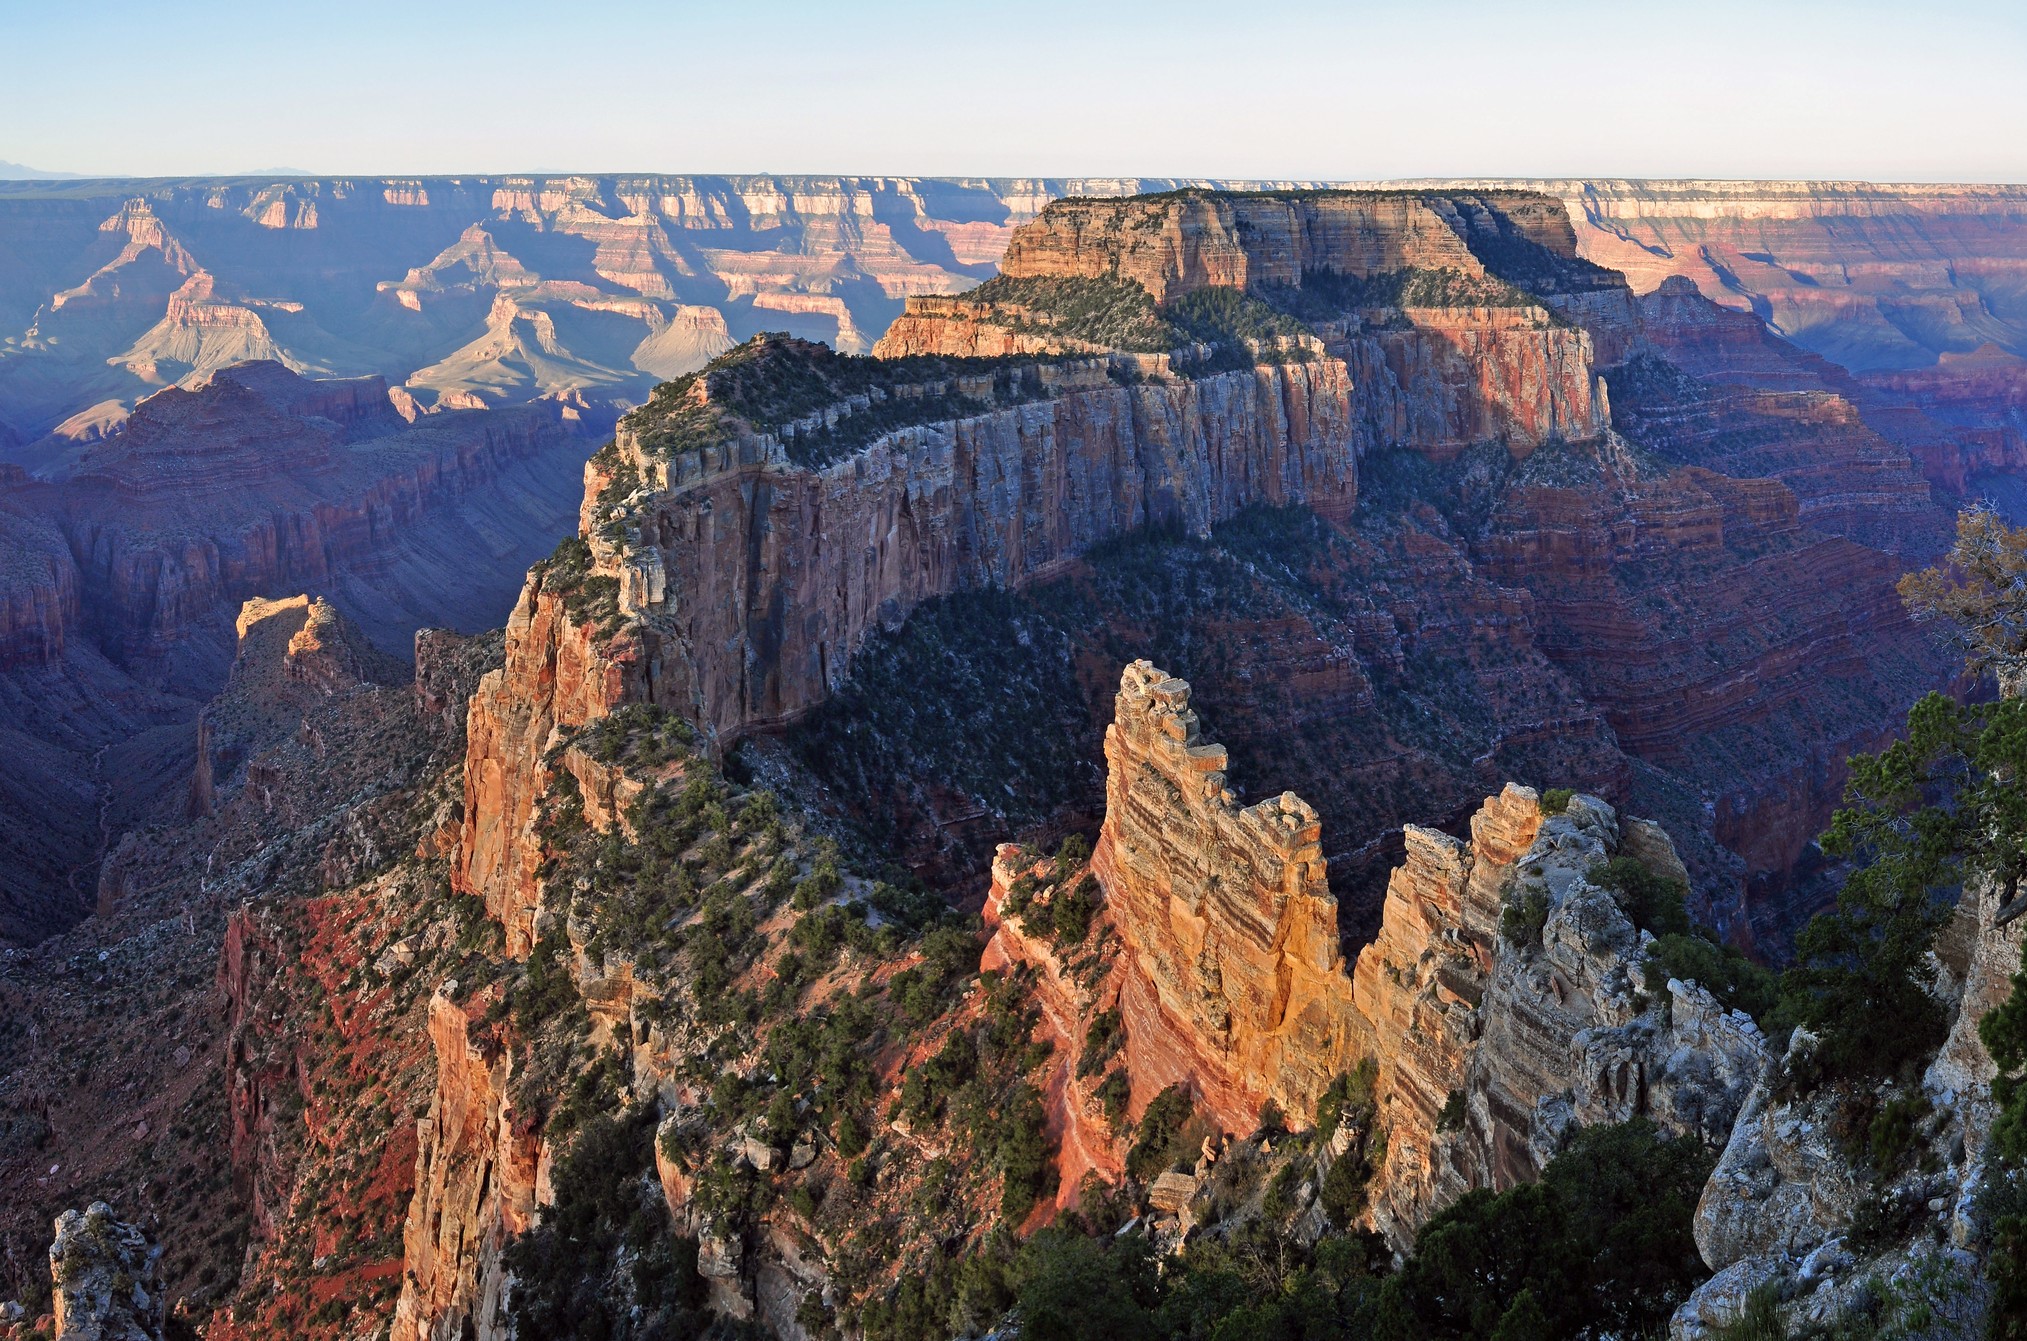 Muted sunrise illuminates gold and orange cliffs at Cape Royal on the North Rim of Grand Canyon National Park